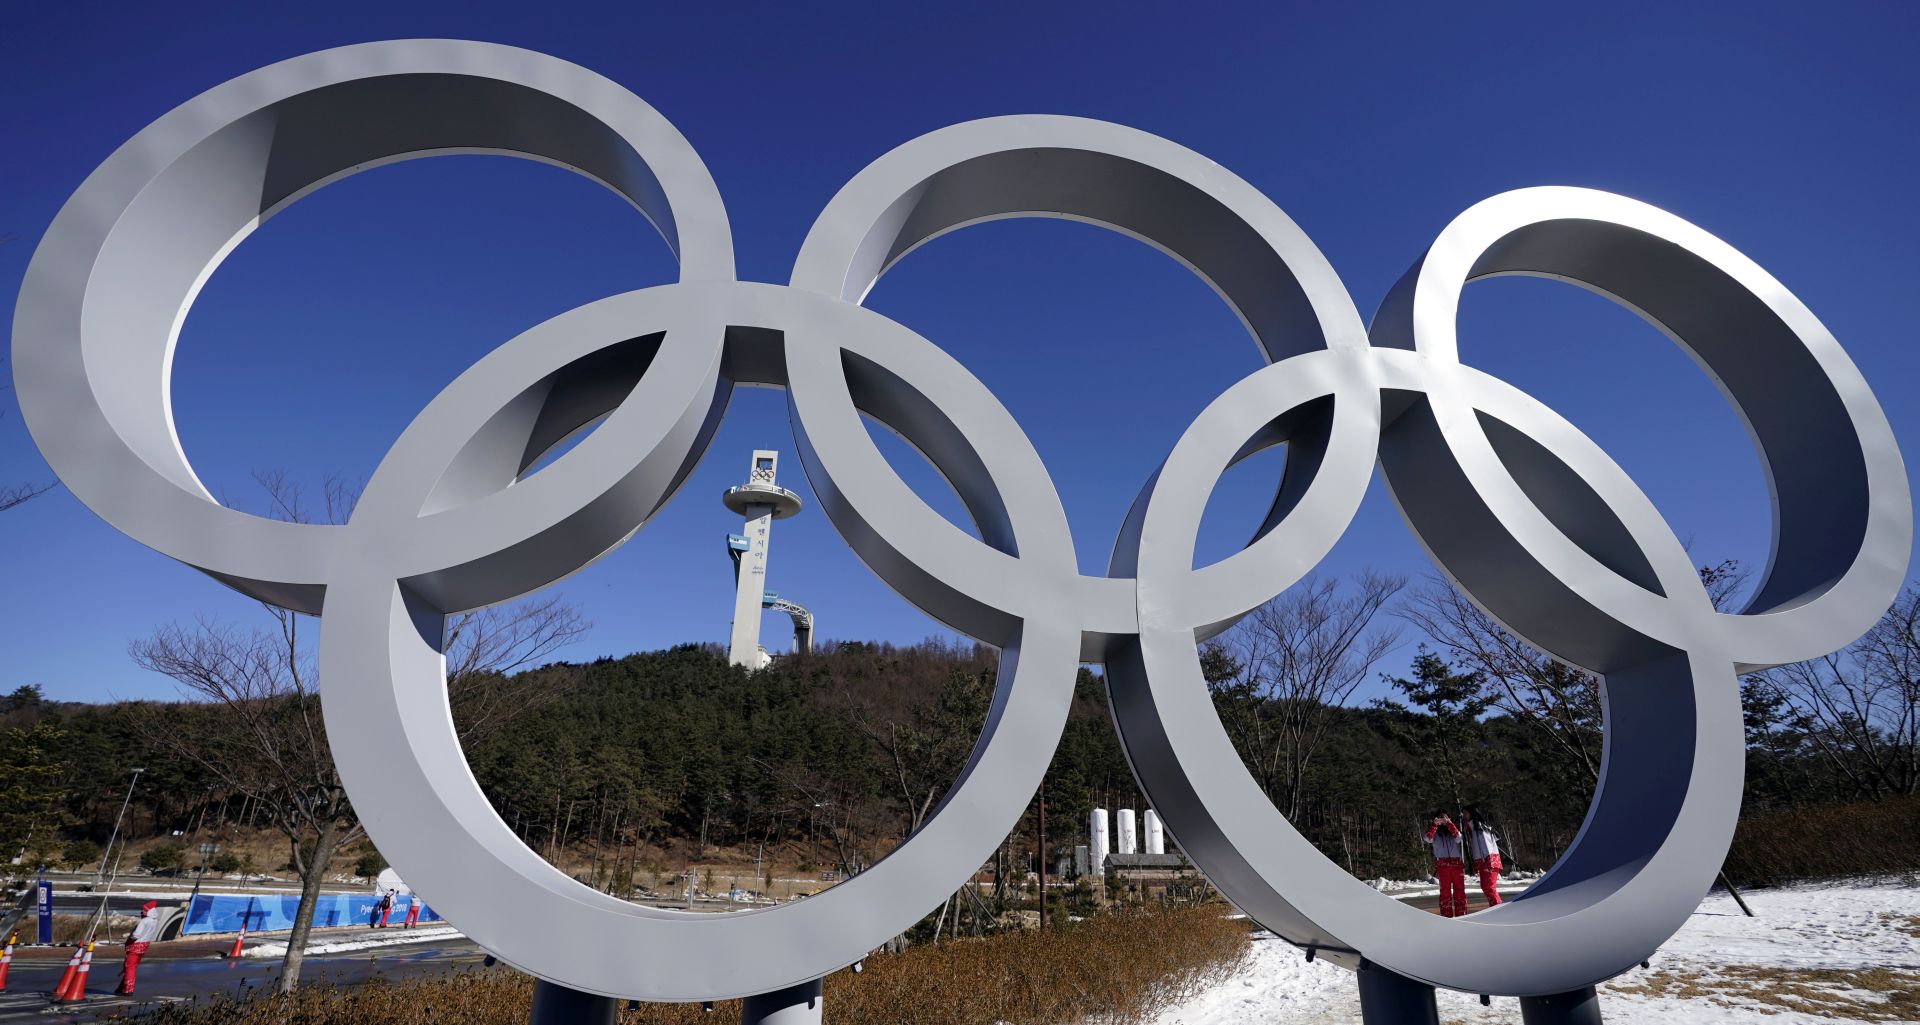 epa06489148 Volunteers pass near the Olympic rings installation (front) and the Alpensia Ski Jumping Center (back) of the PyeongChang Winter Olympic Games 2018 at the Alpensia Resort in the northeastern alpine town of PyeongChang, South Korea, 01 February 2018. The PyeongChang 2018 Winter Games Olympics, will run from 09 to 25 February 2018.  EPA/SERGEI ILNITSKY